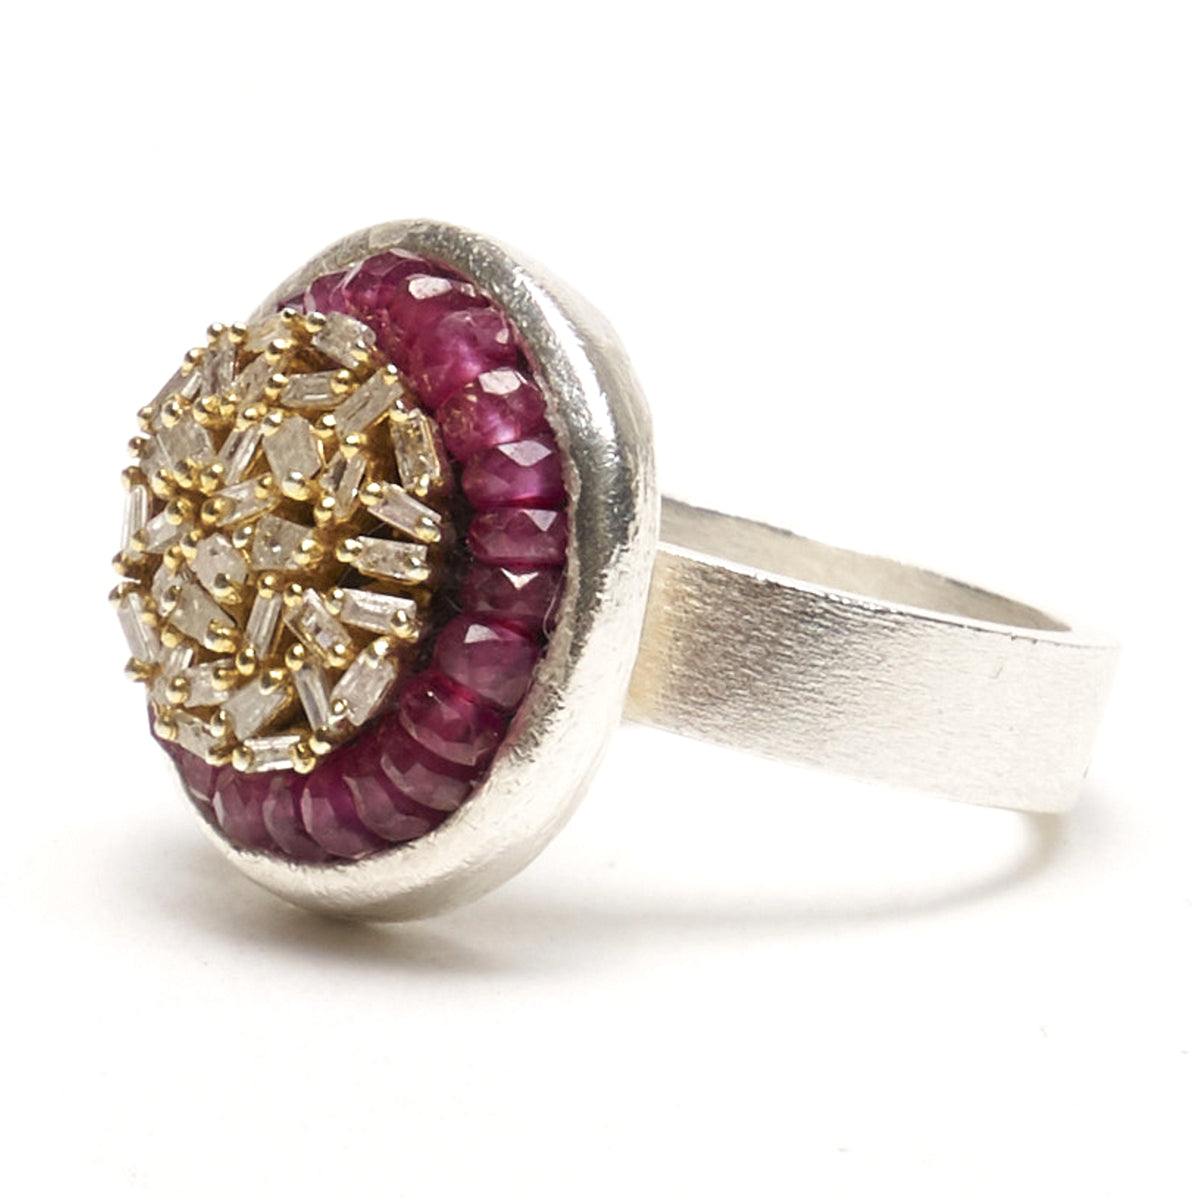 Absolutely Fabulous diamond and ruby mosaic ring